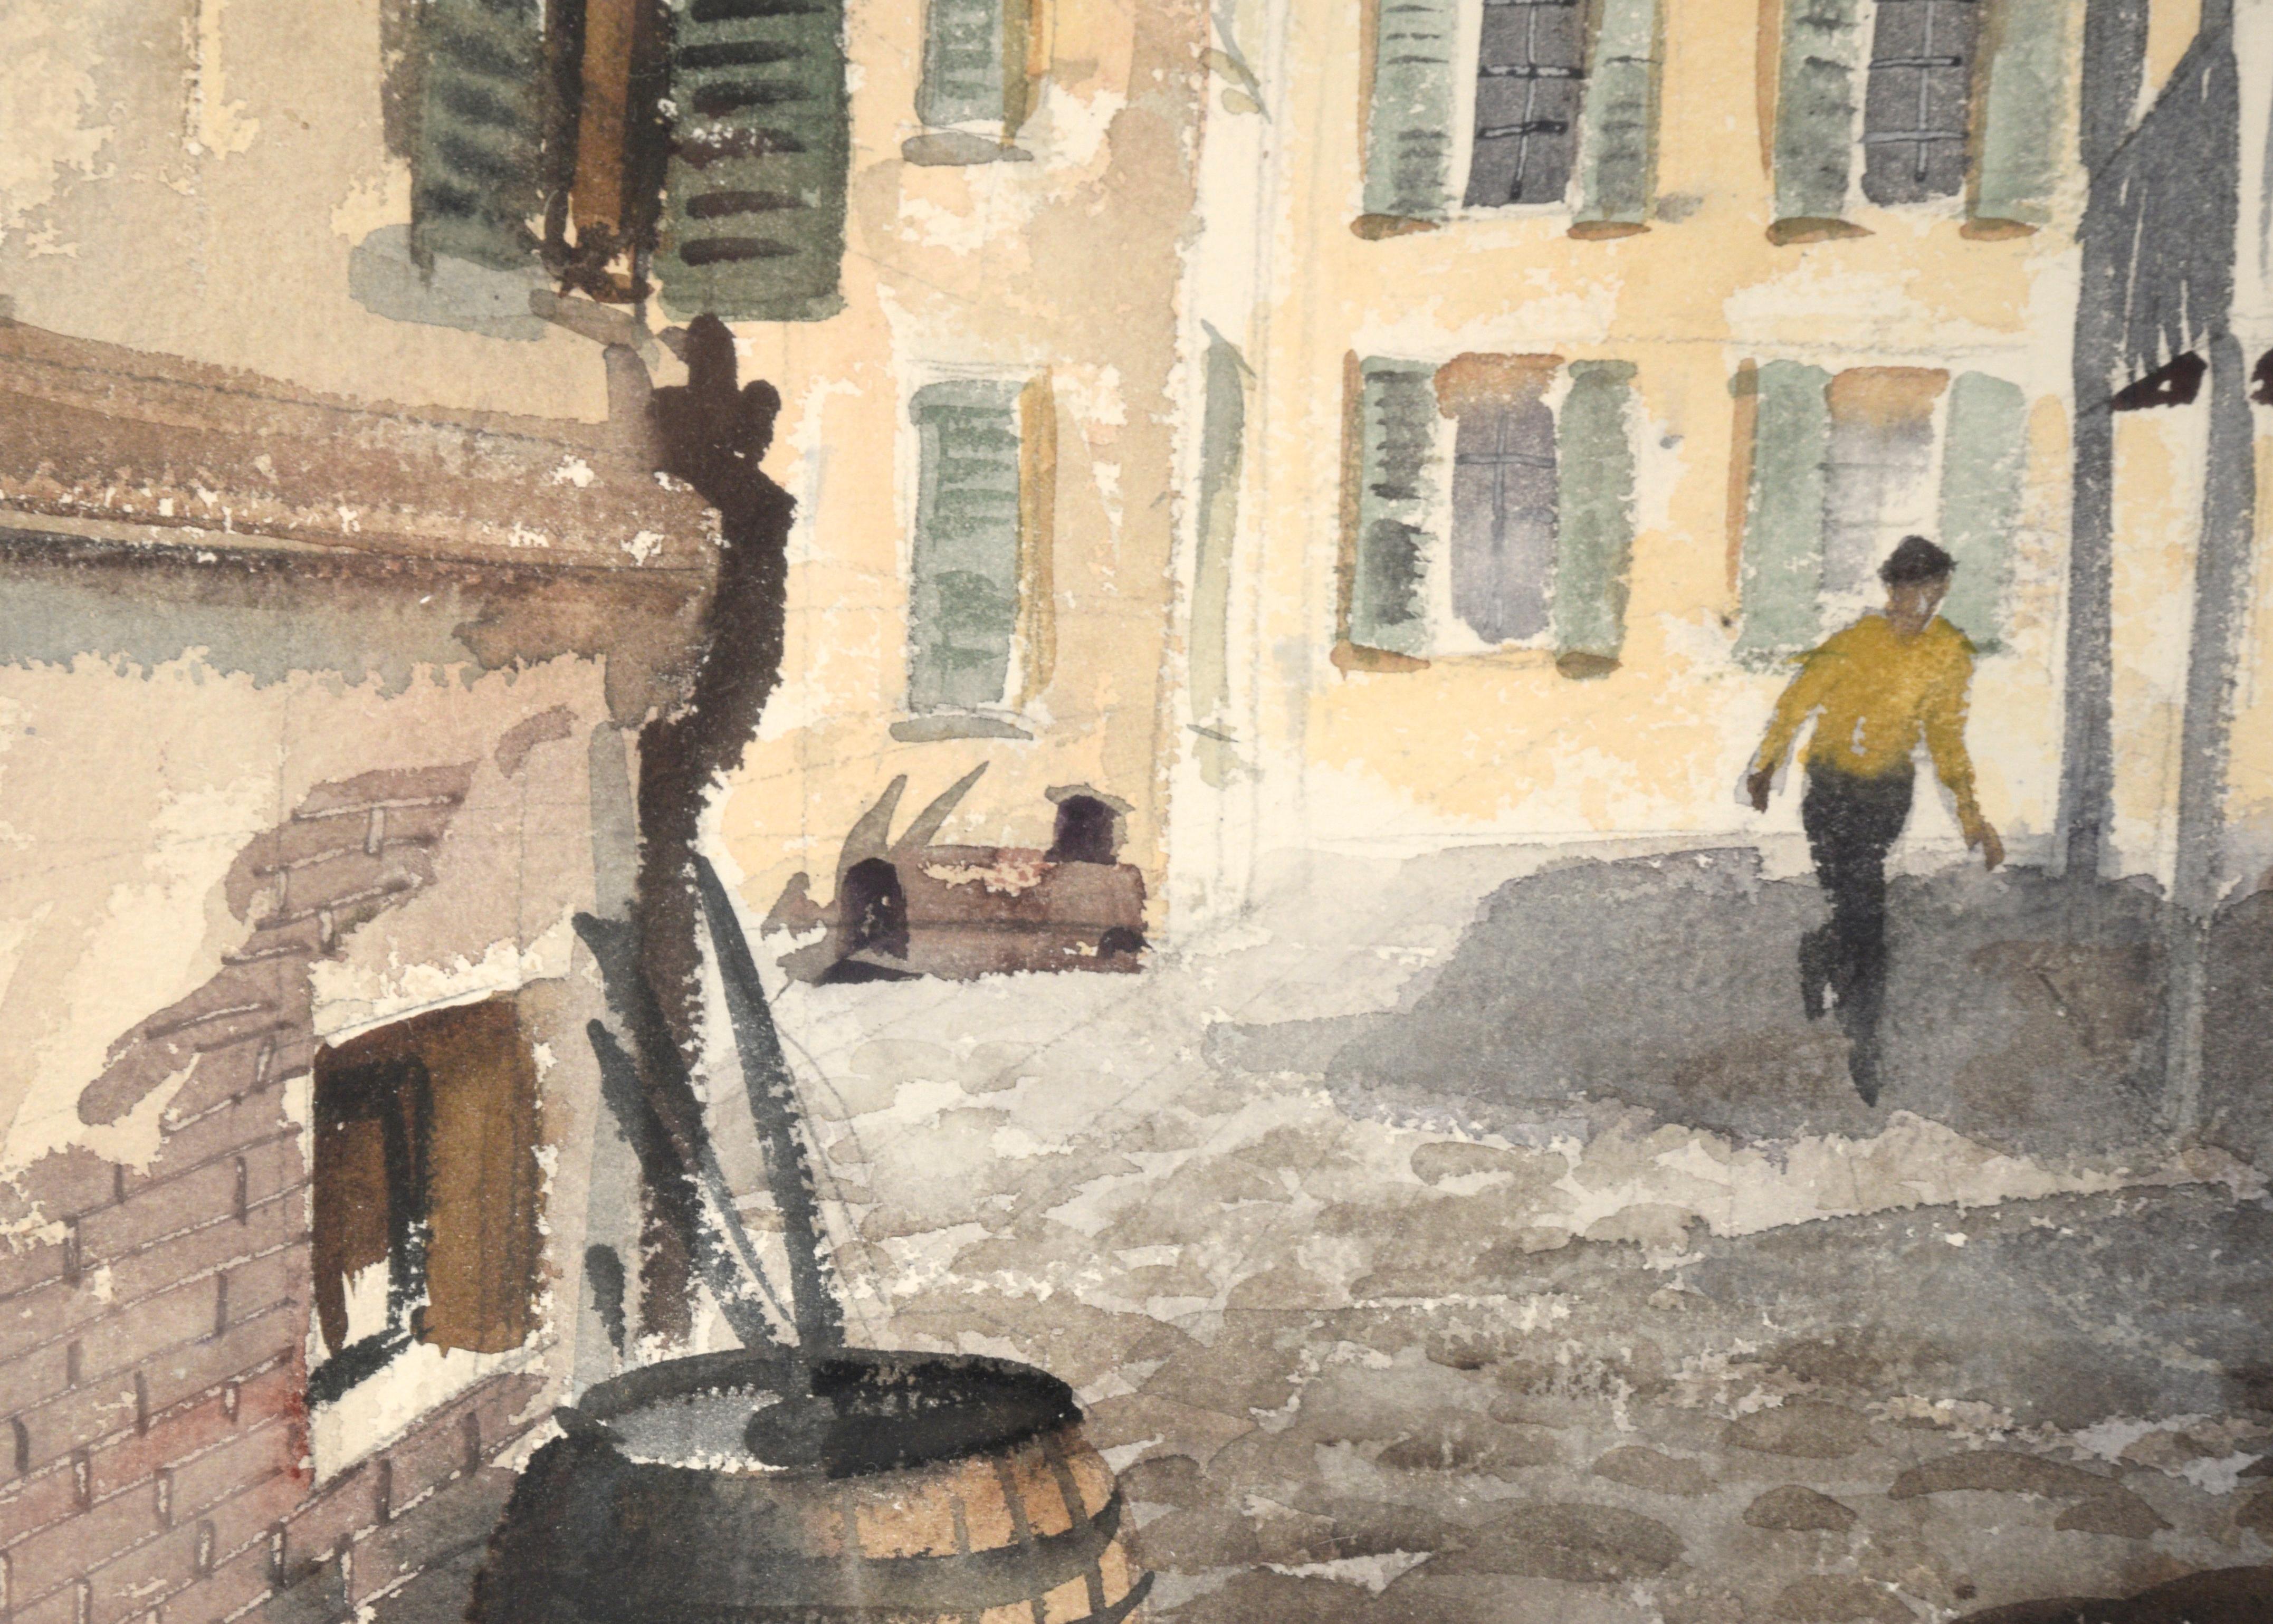 Detailed watercolor city scene of figures going about daily life in between houses, with a parked green bicycle by Alexander Kortner (American, 1905-1999). Signed 